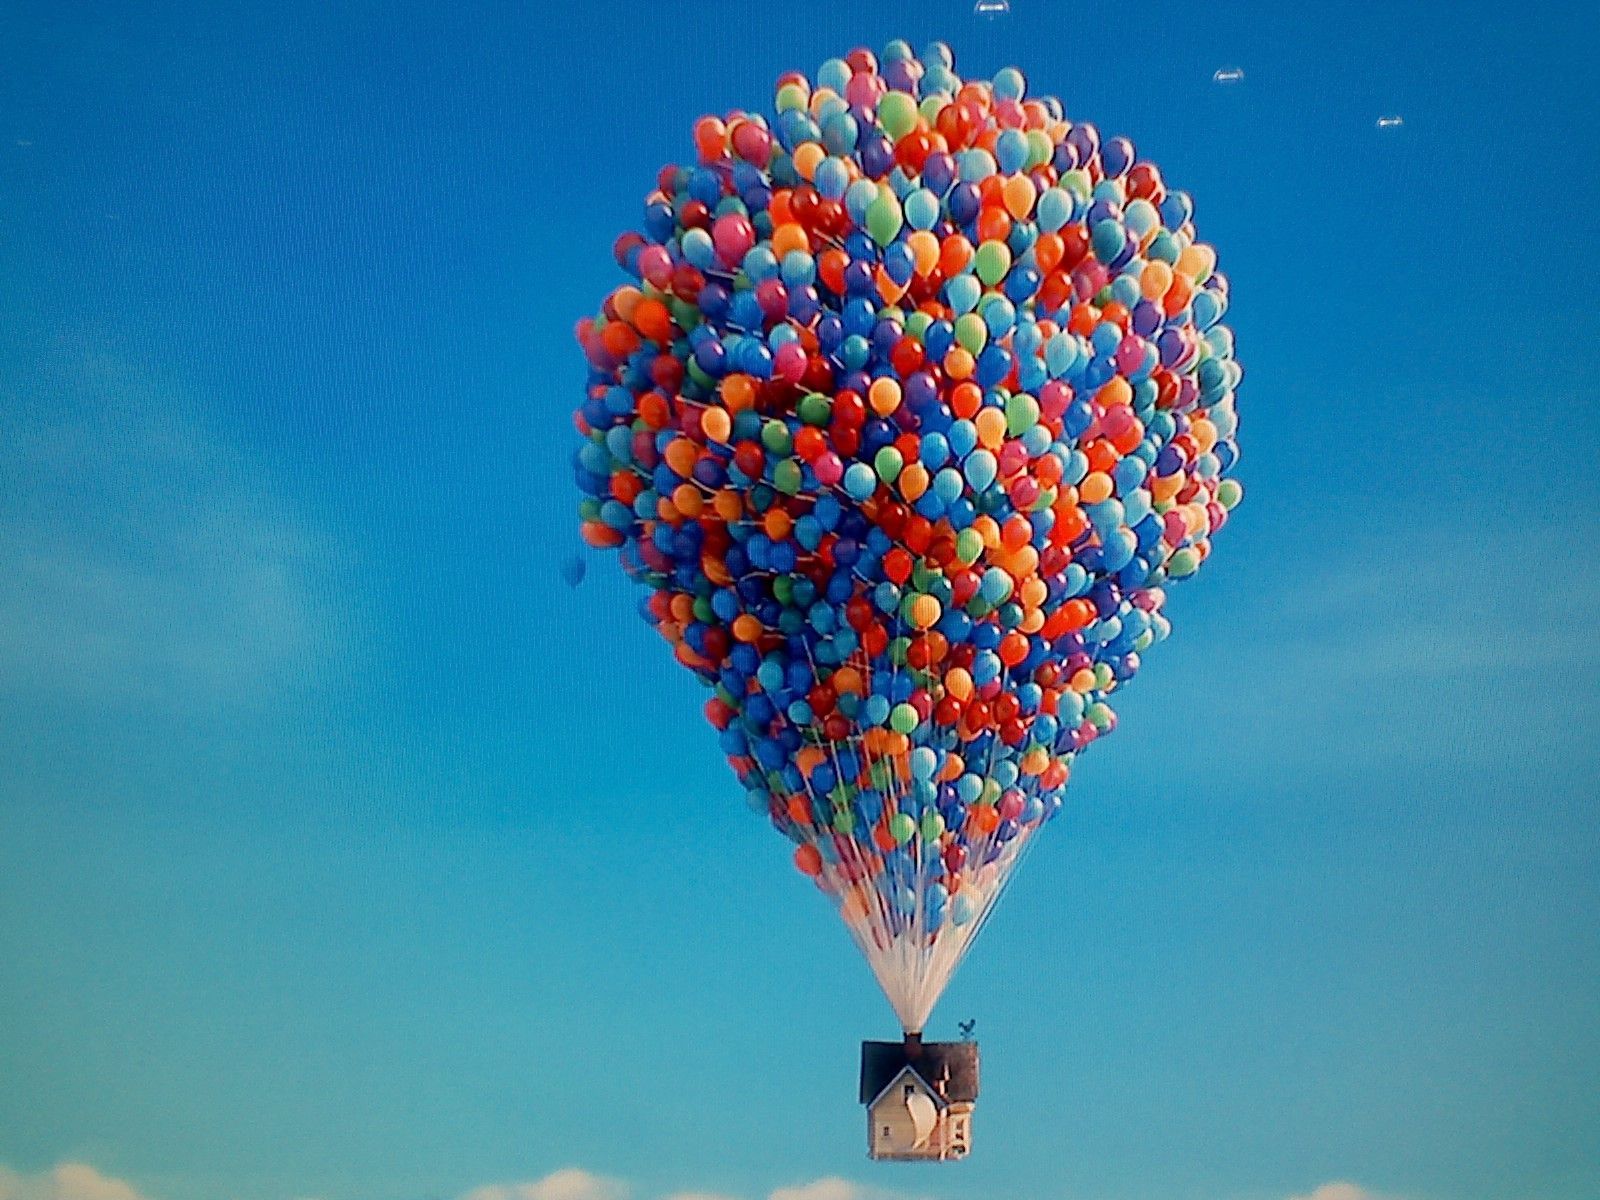 Colorful Balloons Desktop Wallpaper and Images | Cool Wallpapers